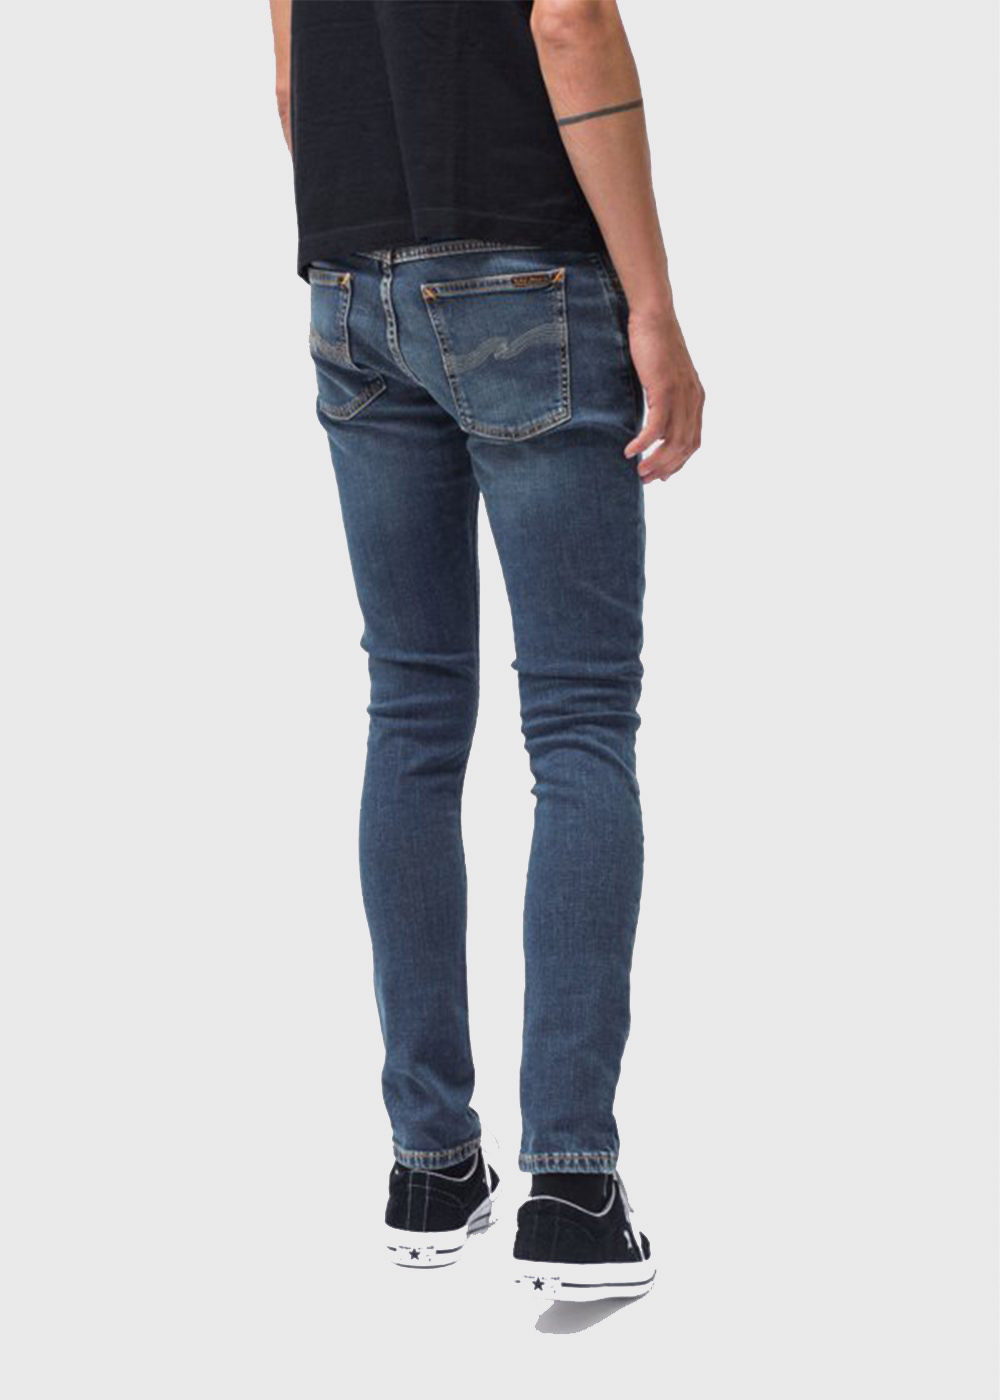 NUDIE JEANS SKINNY LIN - MID AUTHENTIC POWER | Pronto